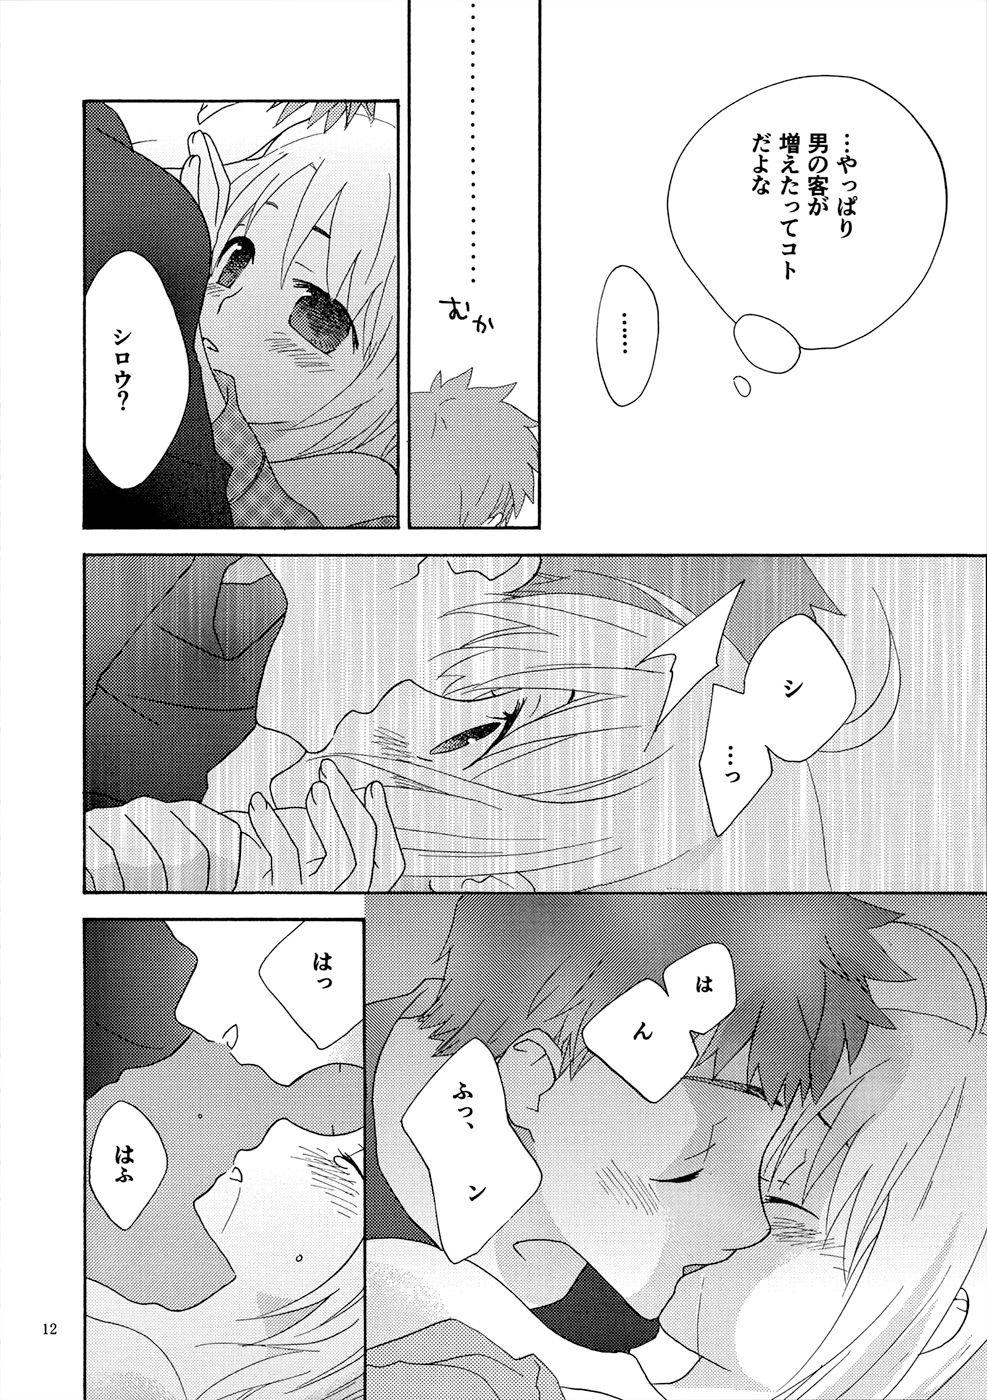 Fingers POP STAR - Fate stay night Realsex - Page 11